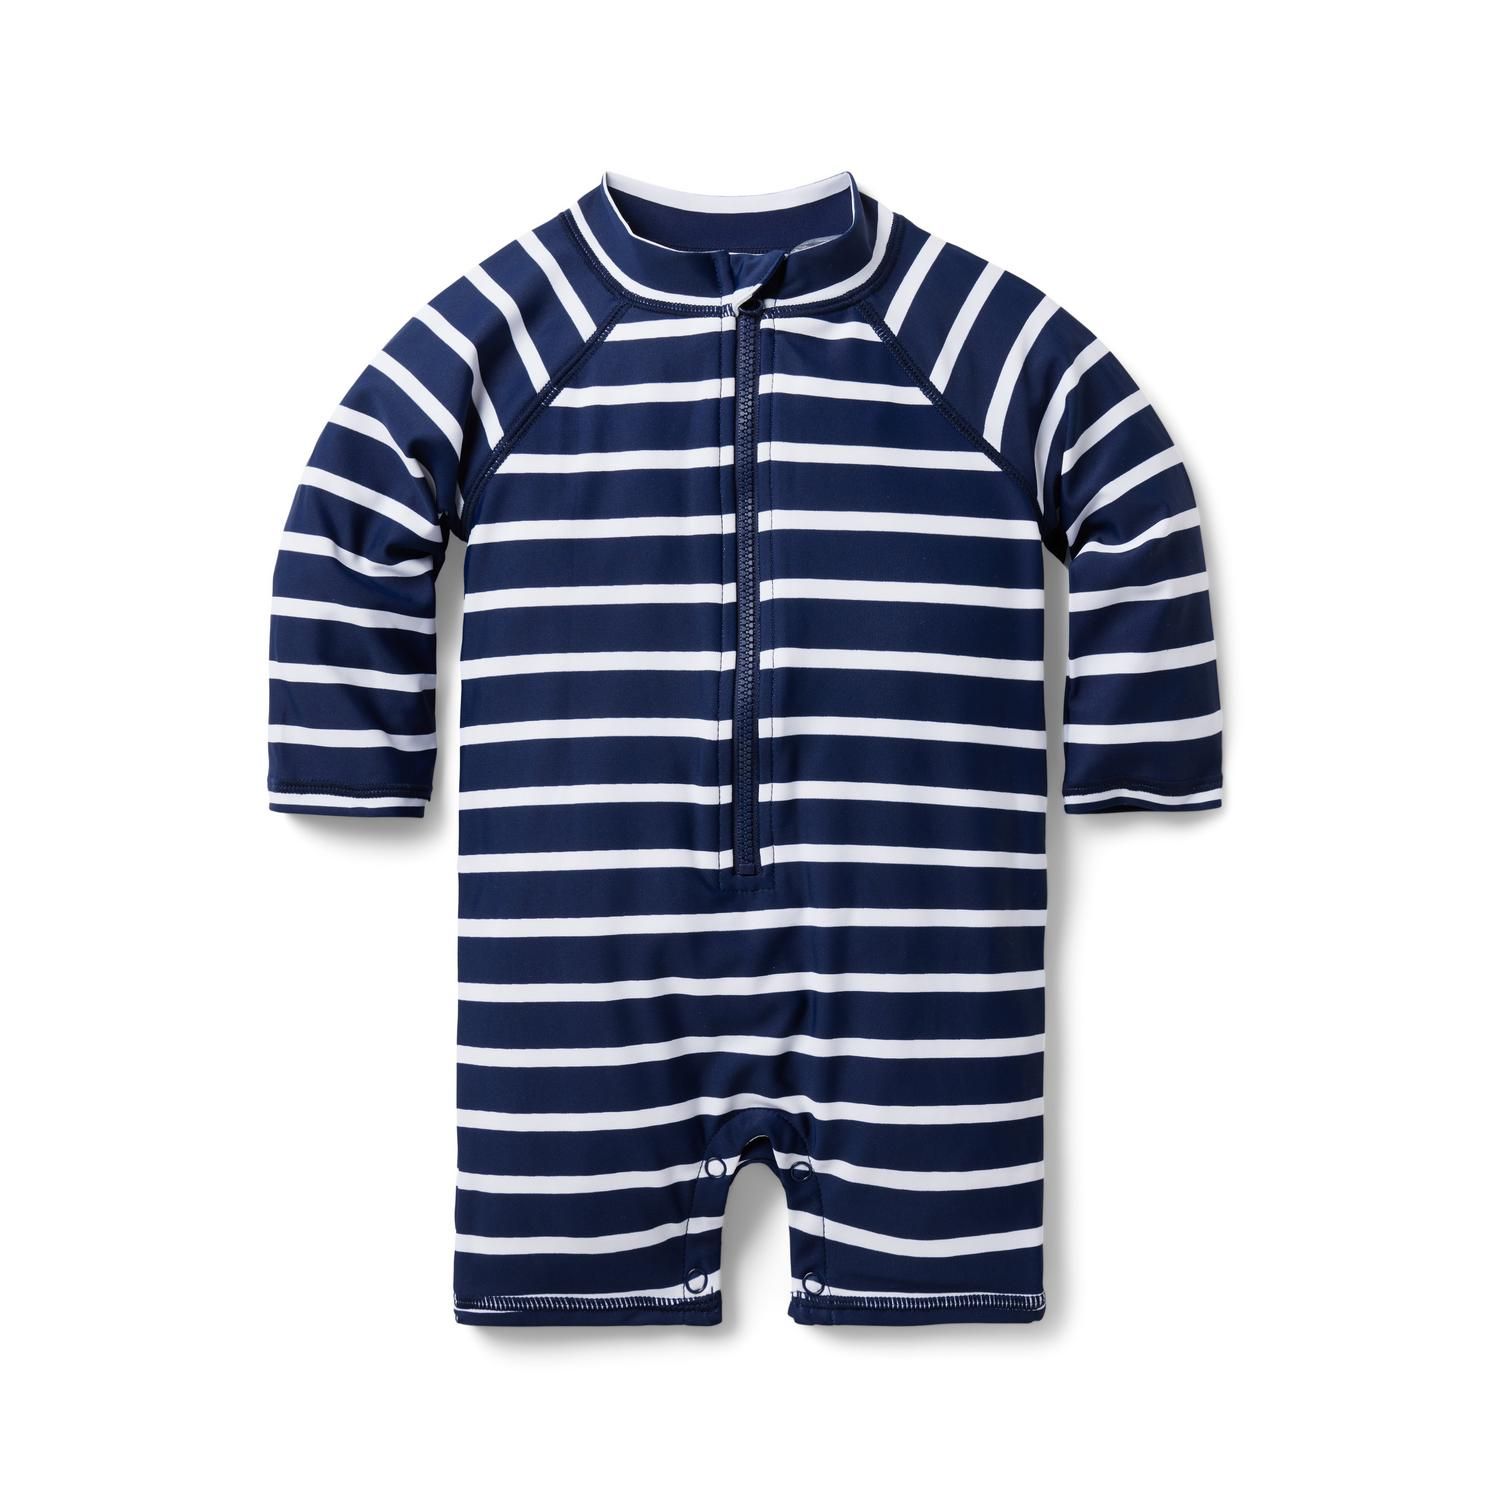 Baby Recycled Striped Rash Guard Swimsuit | Janie and Jack